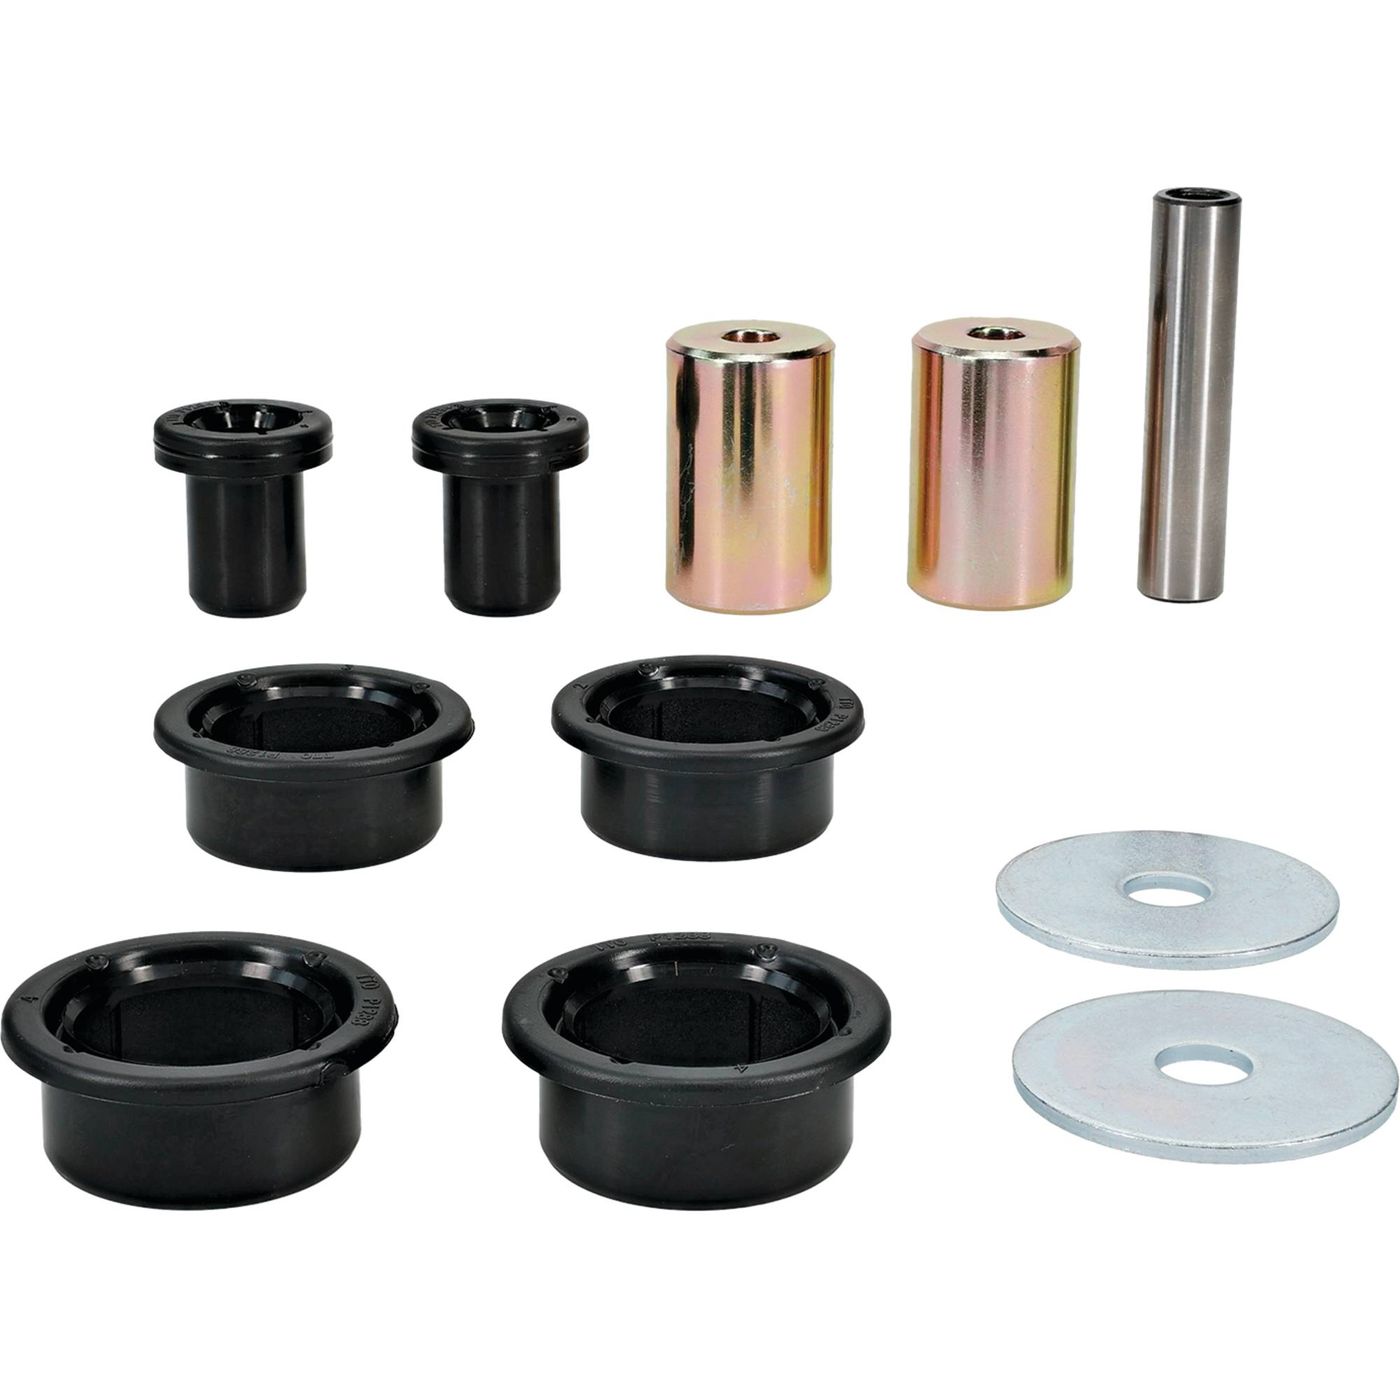 Wrp Rear Ind. Suspension Kits - WRP501213 image